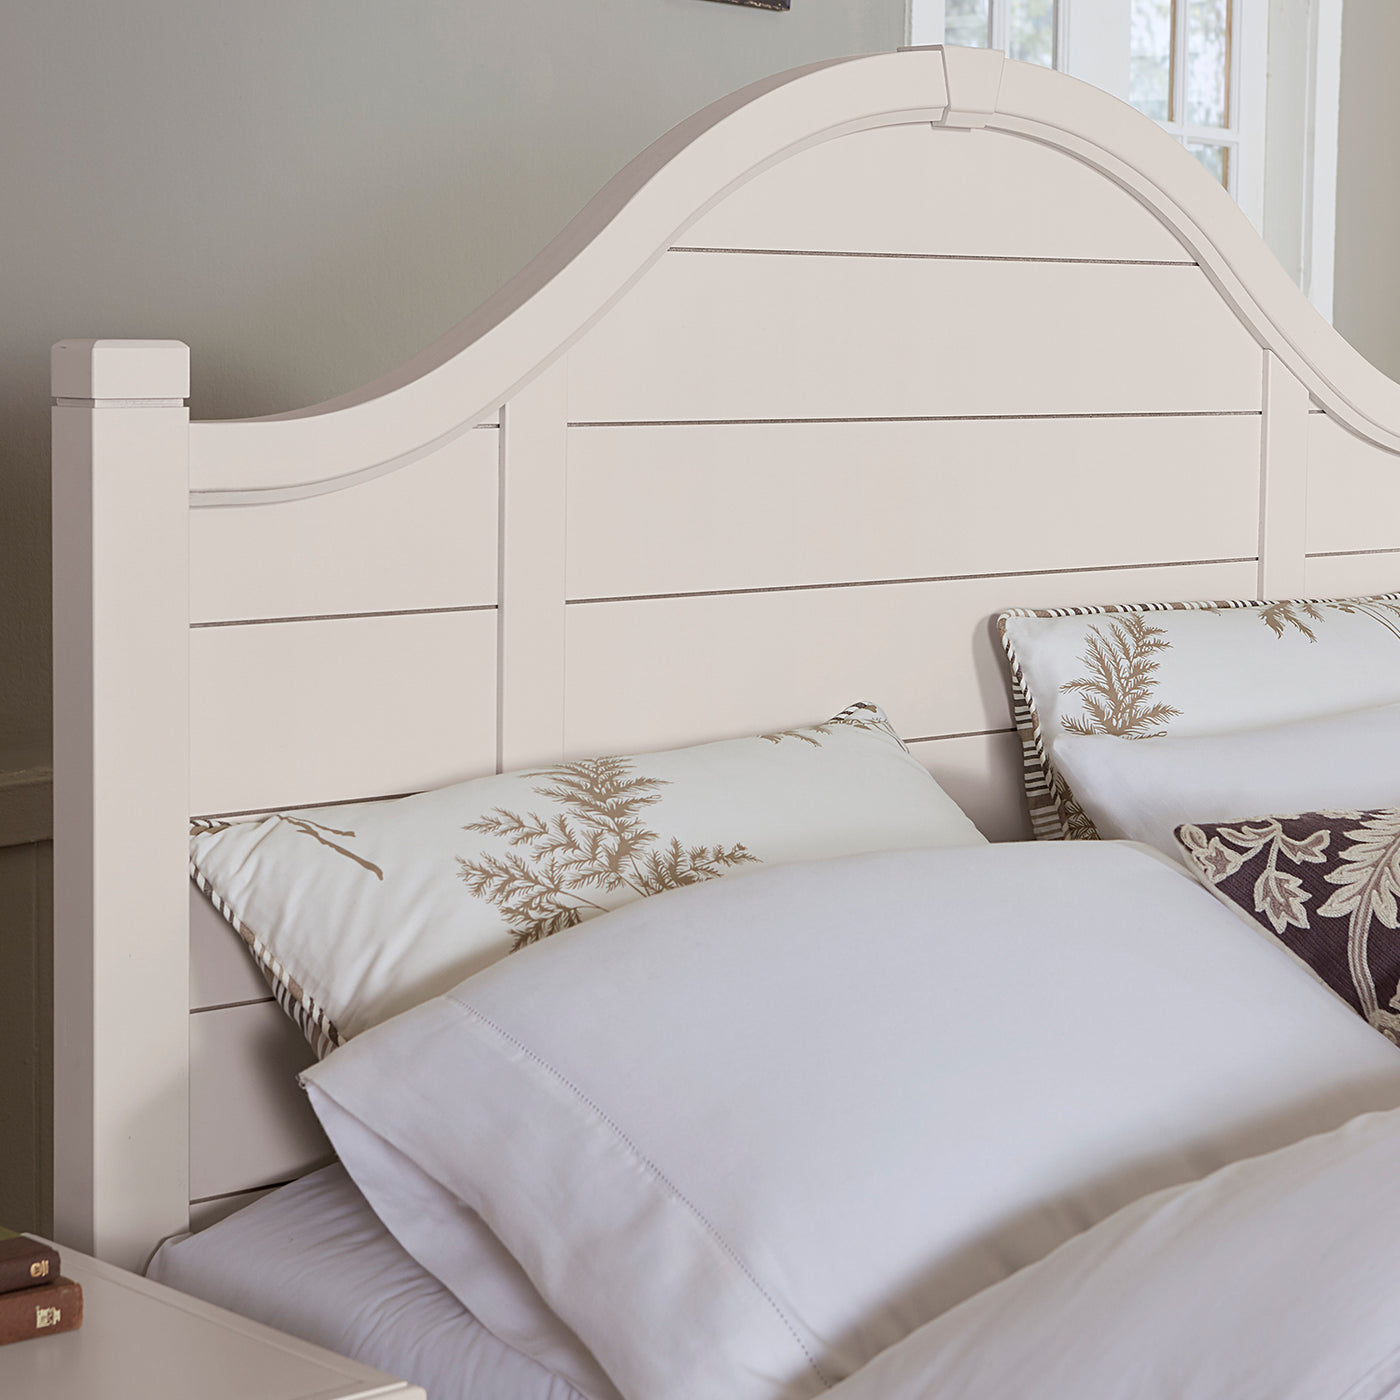 LMCo. Bungalow Collection Arch Bed with Low Profile Footboard - King and Queen